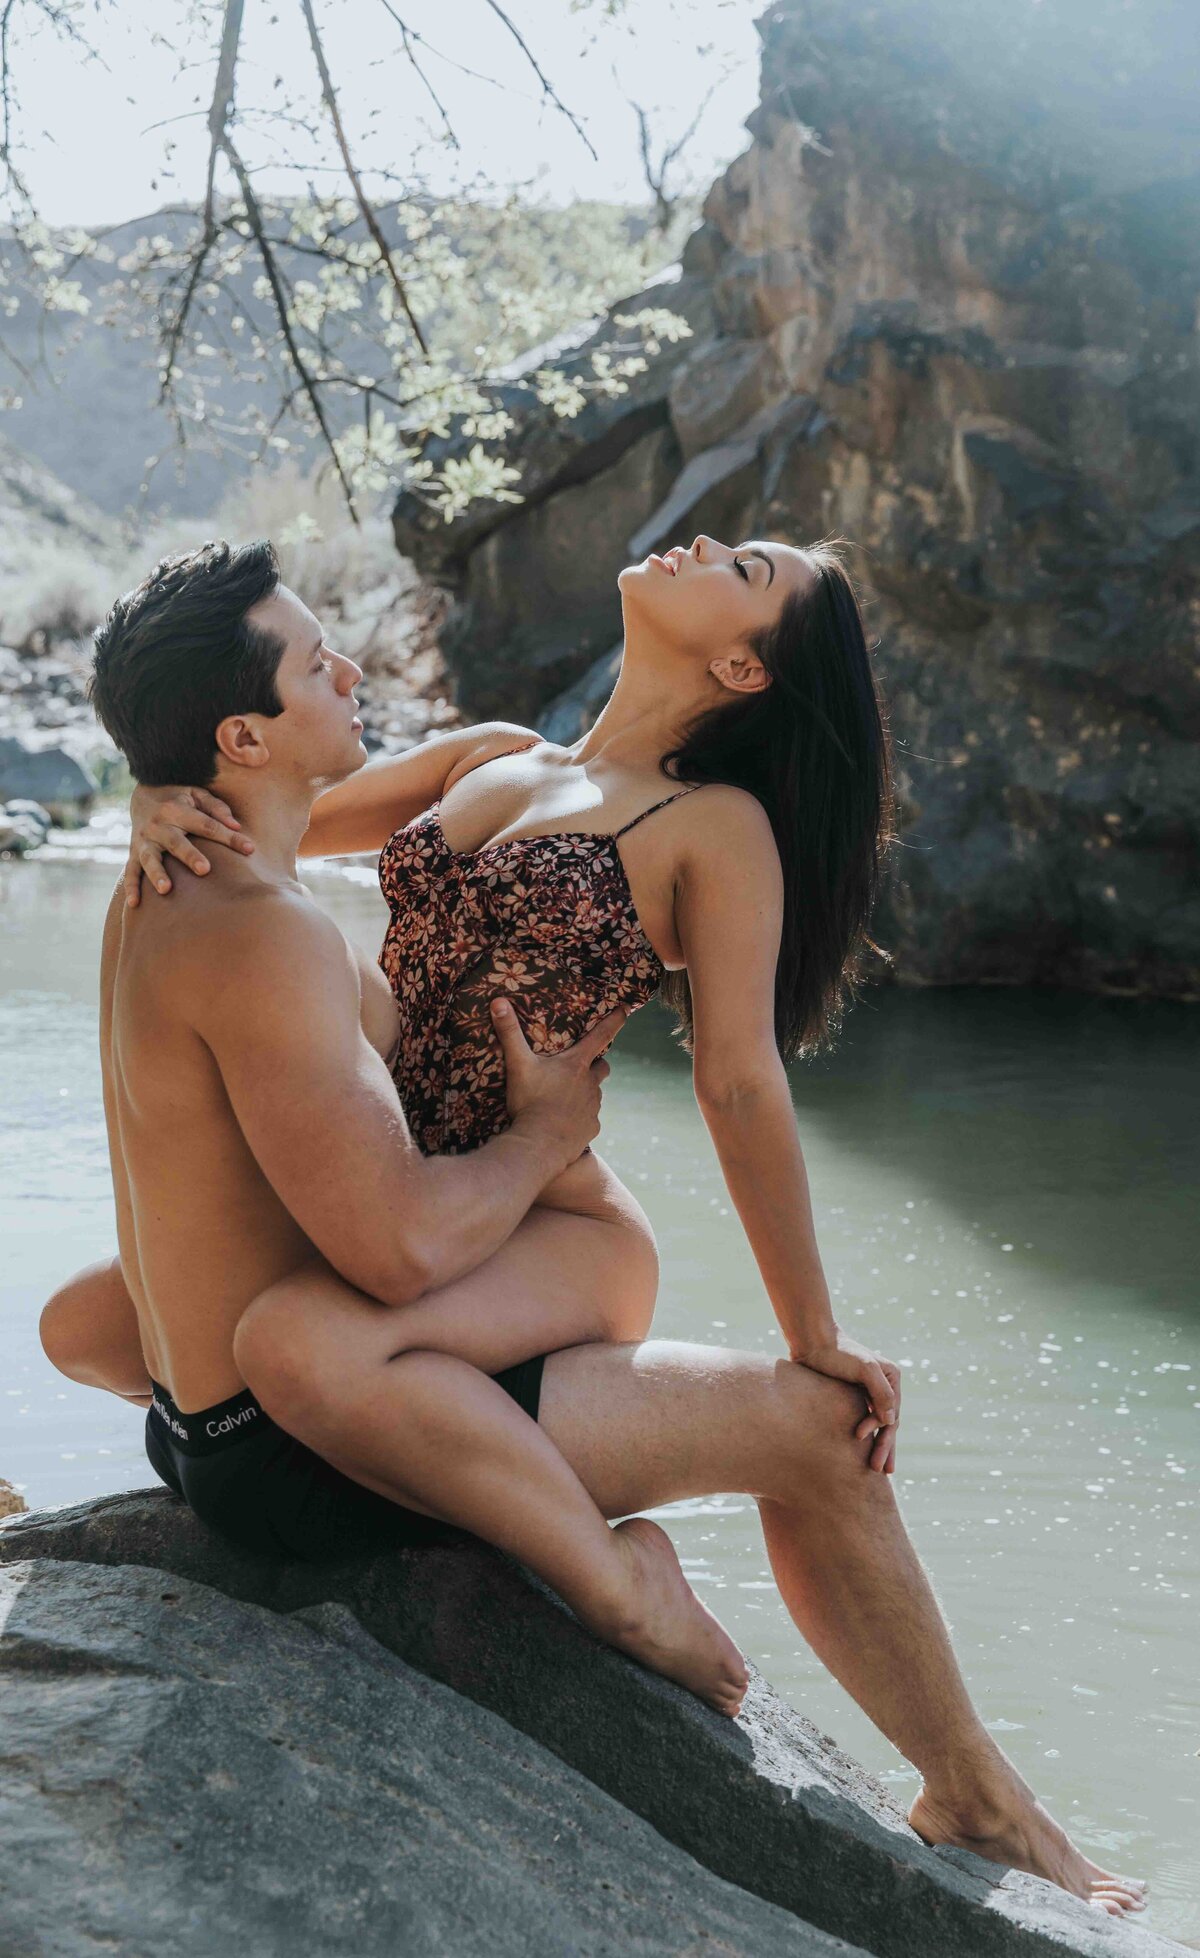 A couple posed on a rock. She has her legs wrapped around him and she is throwing her head back while he holds her.